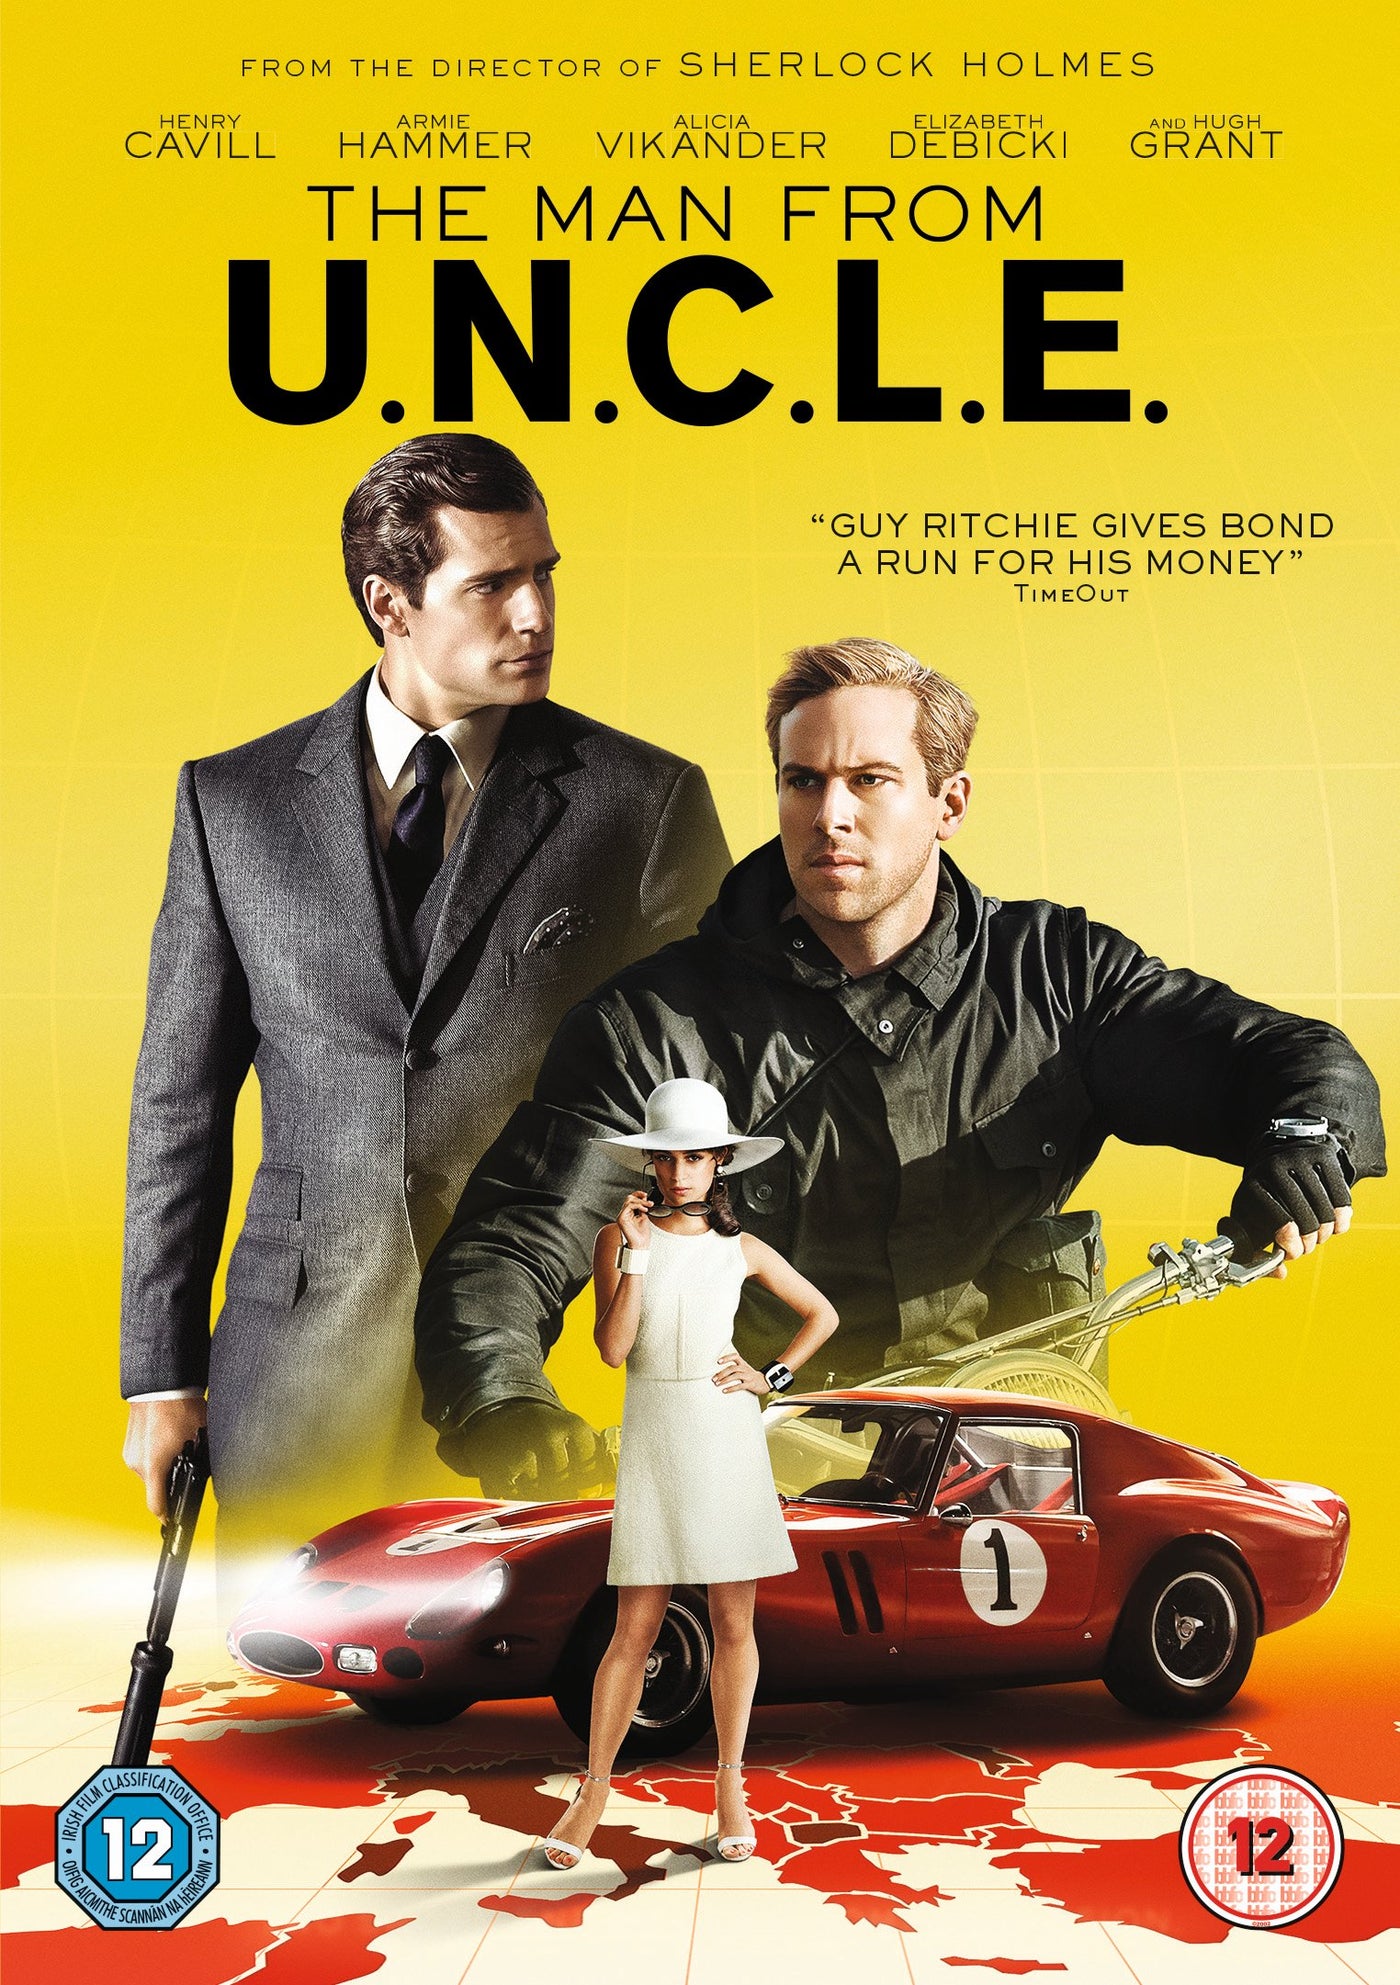 The Man from U.N.C.L.E. (DVD)